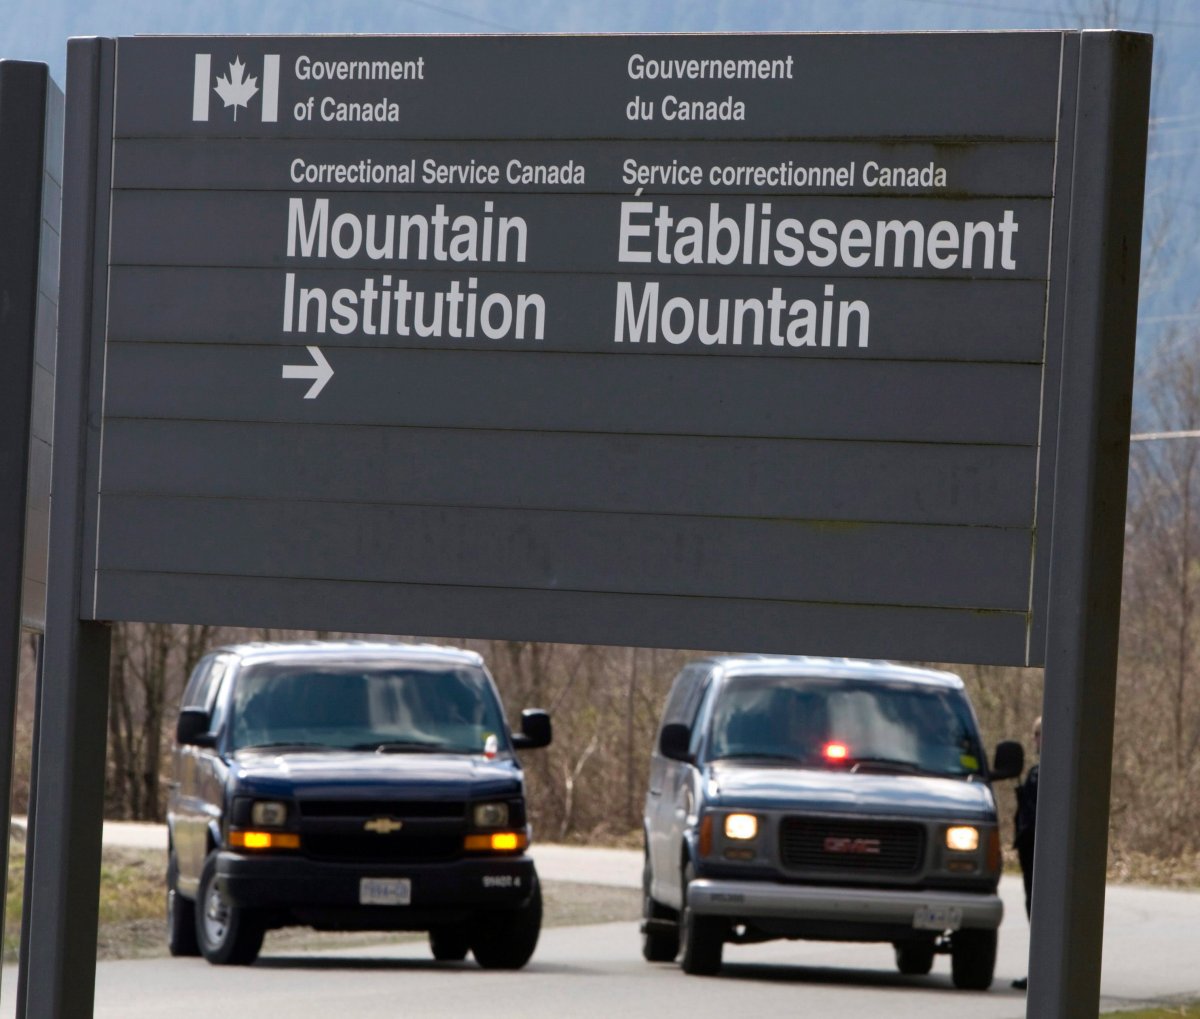 A case of COVID-19 has been confirmed at the Mountain Institution, a federal prison in Agassiz, B.C.